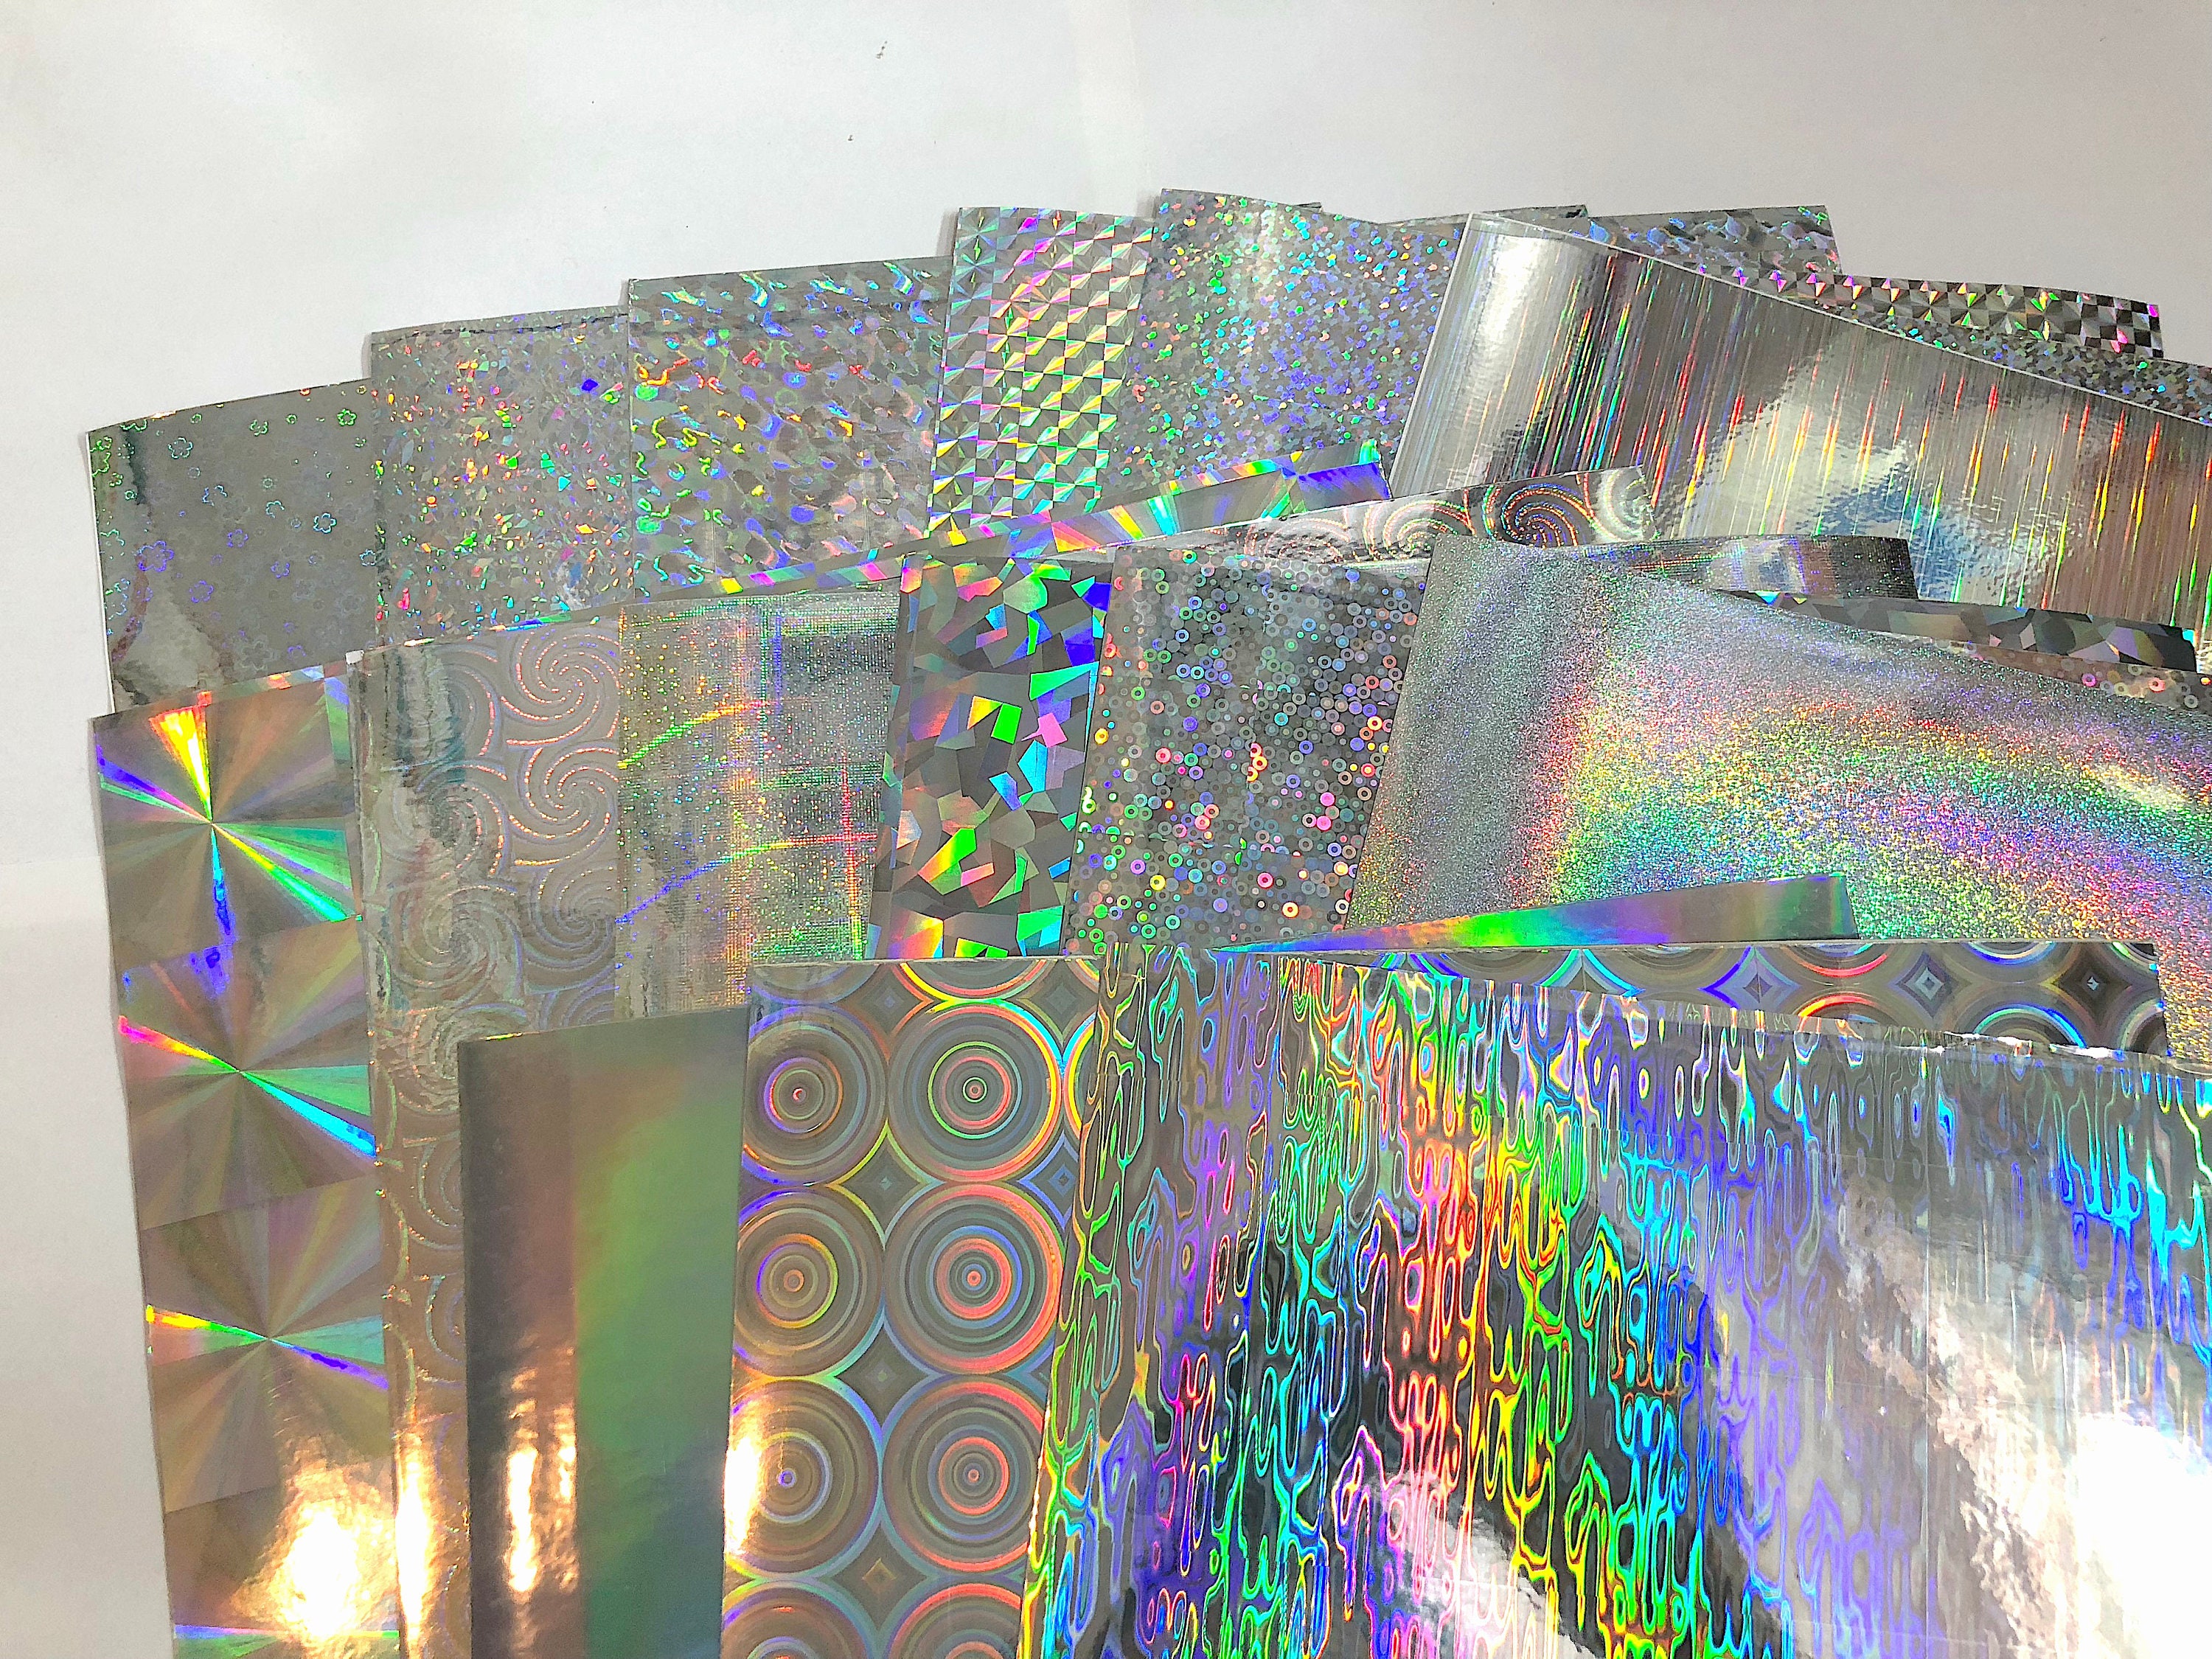 Crumpled Holographic Film Pattern